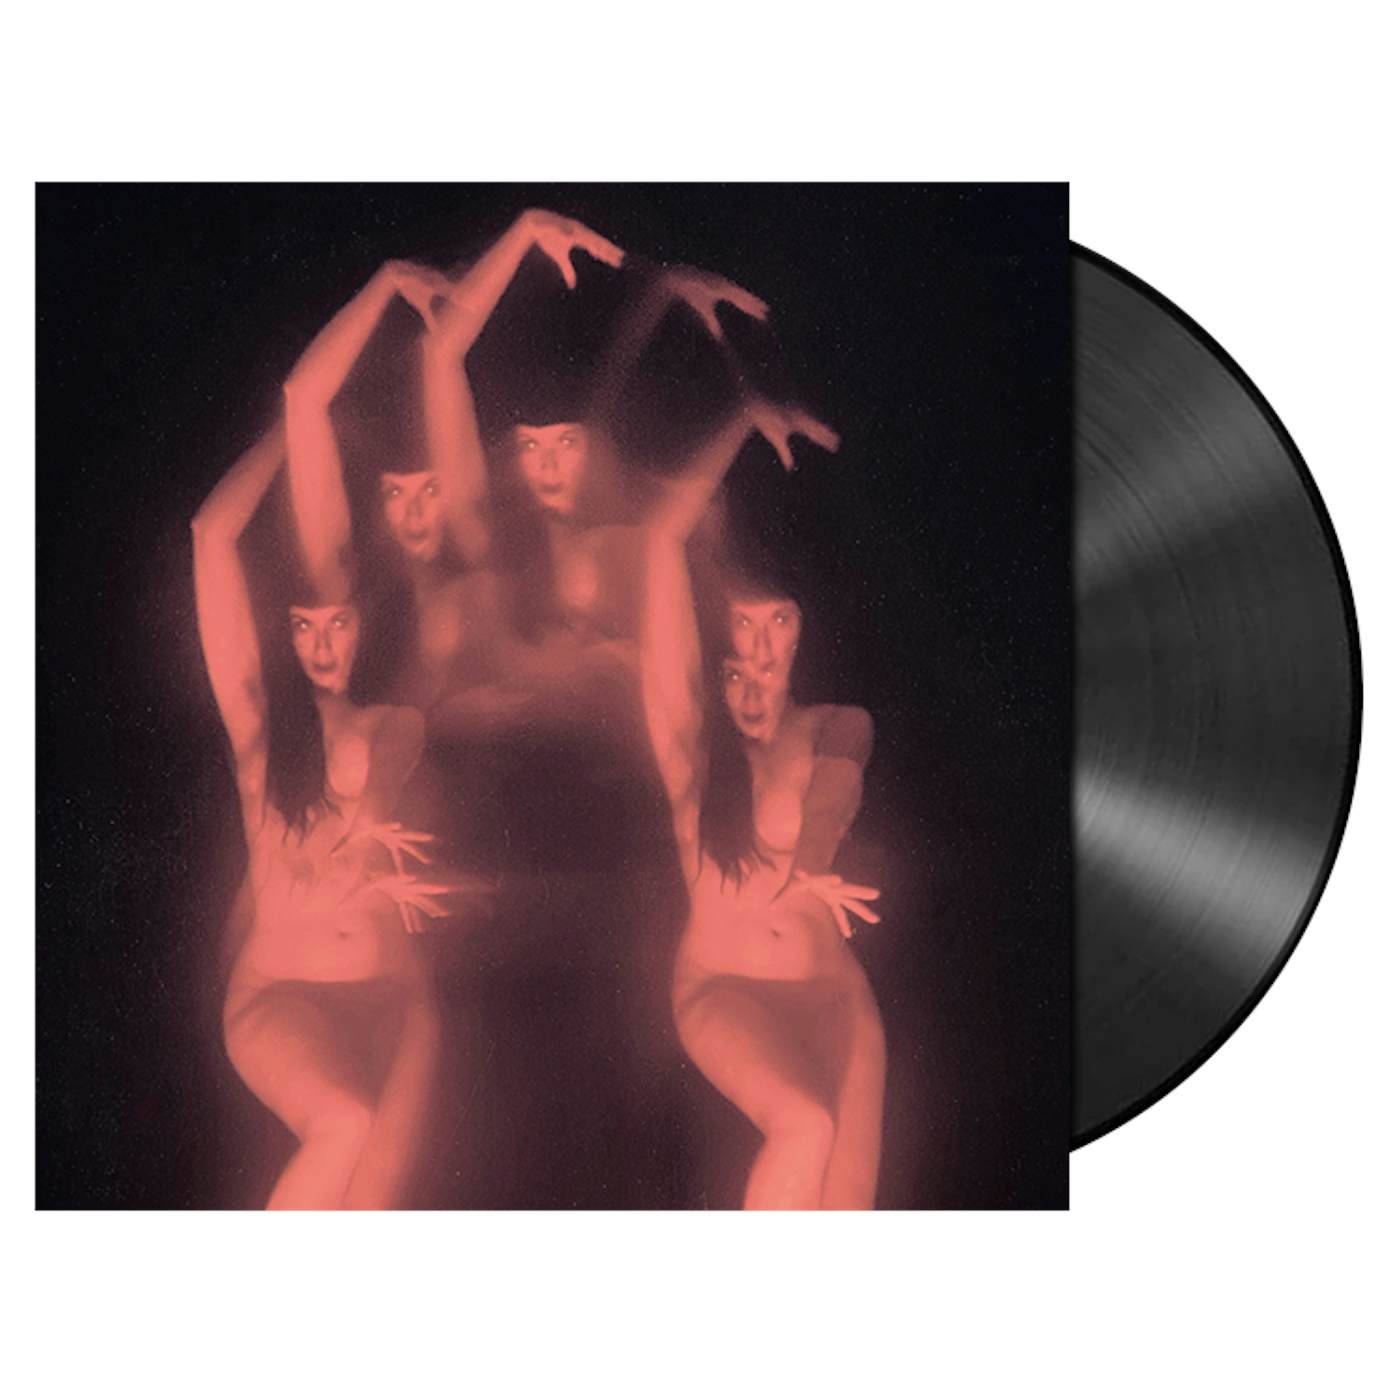 GOST - 'Rites Of Love And Reverence' LP (Vinyl)